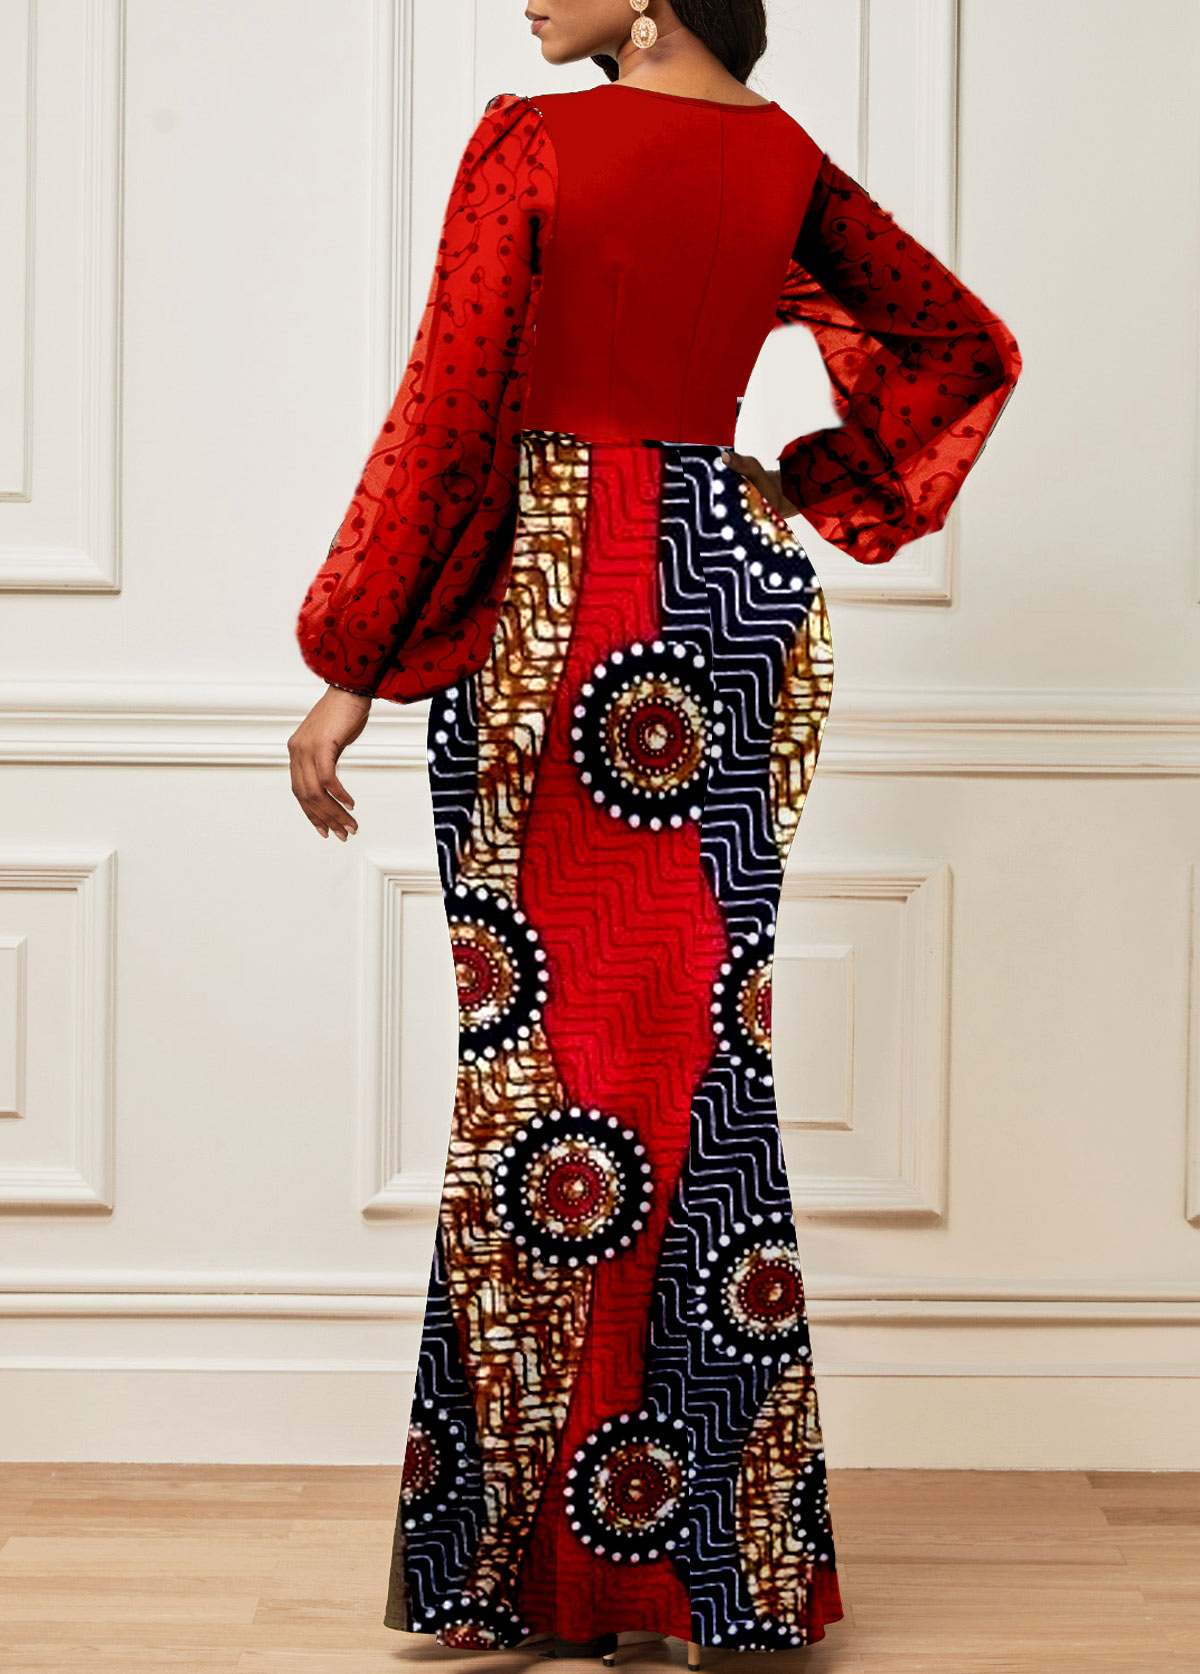 Red Lace Tribal Print Long Sleeve Maxi Bodycon Dress